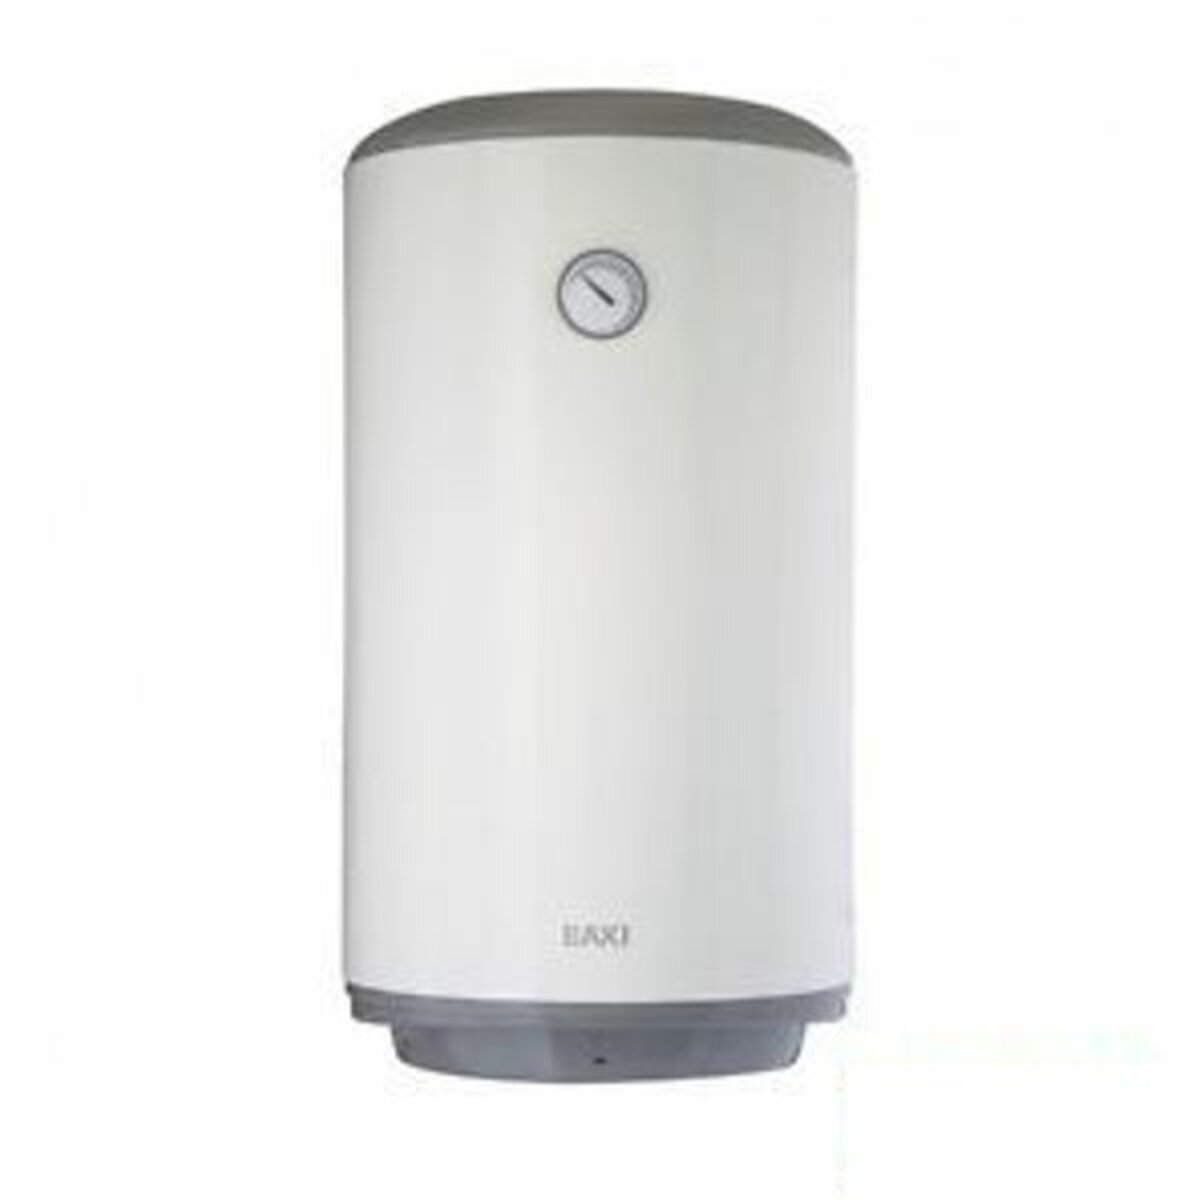 Electric water heater Must + line Baxi v580 80 liters 2 years